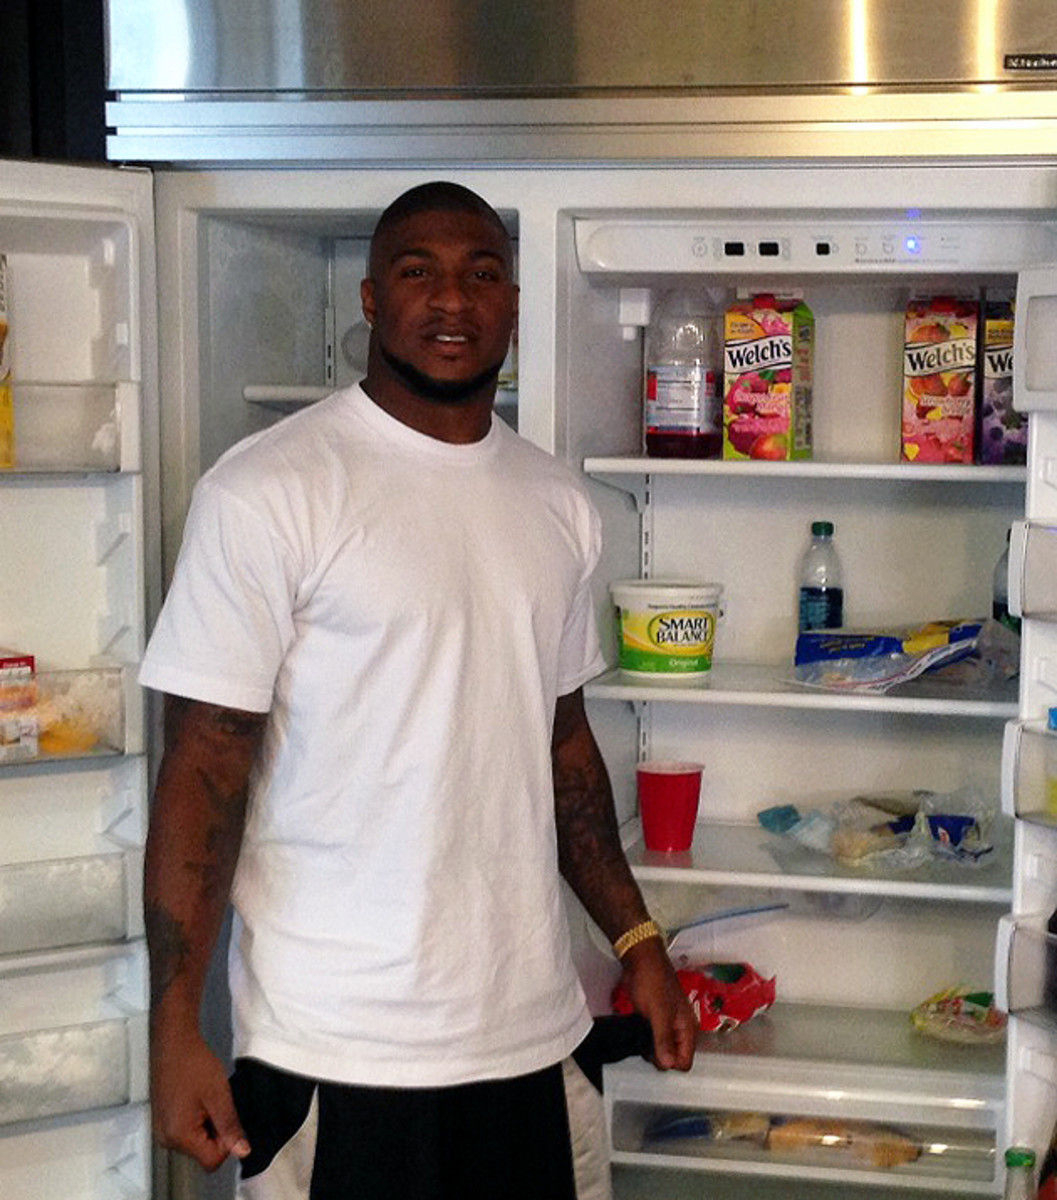 With a skimpy selection in his fridge, the Bucs' safety explains that he's simply strapped for cash after the NFL fined him nearly half a million dollars for on-the-field transgressions over the years.